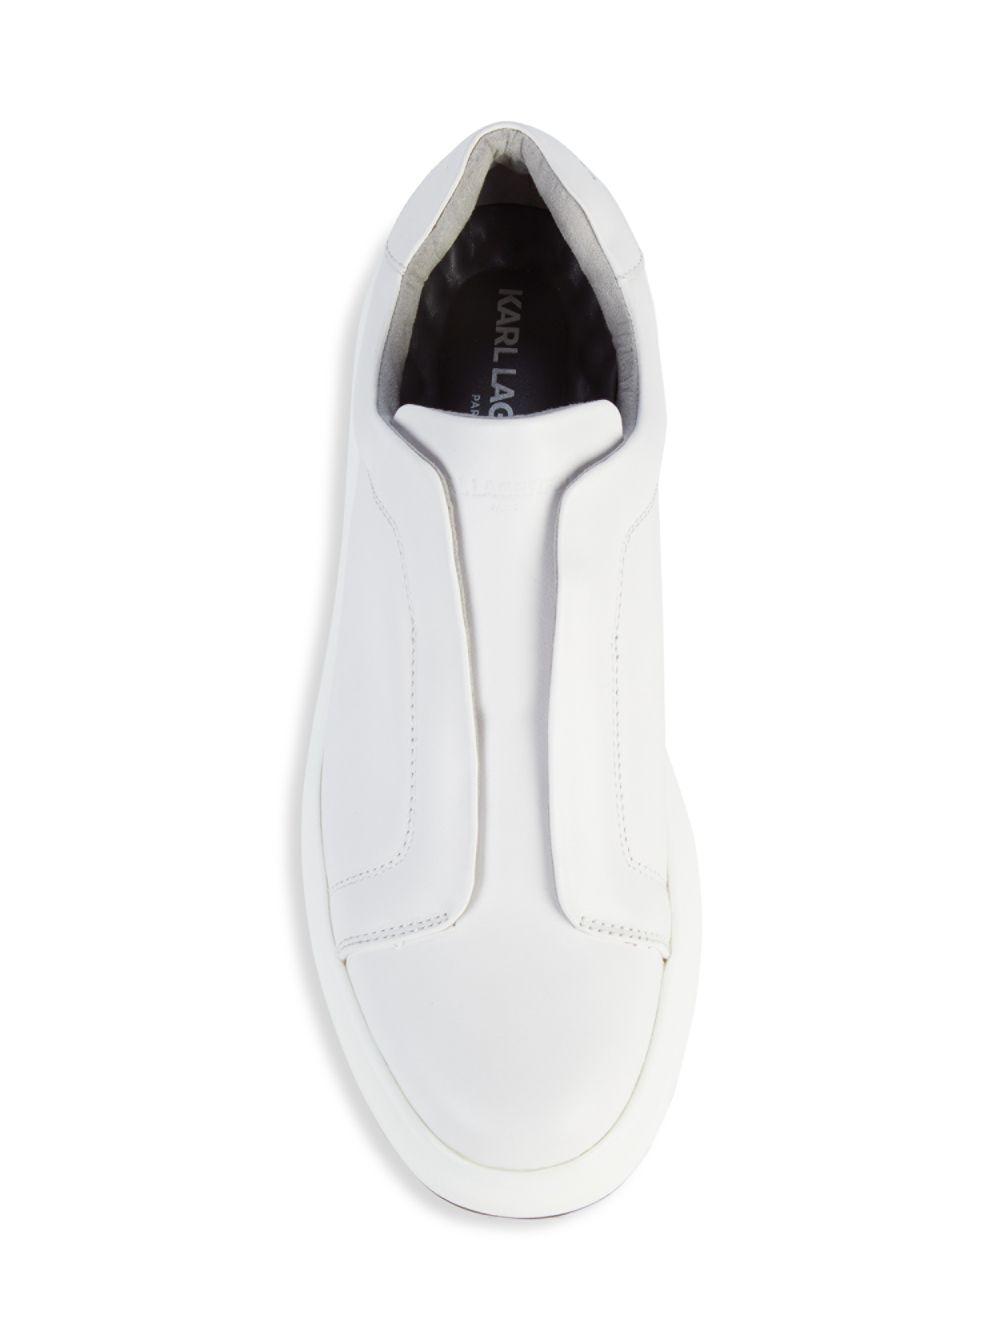 Karl Lagerfeld Laceless Platform Leather Sneakers in White for Men - Lyst